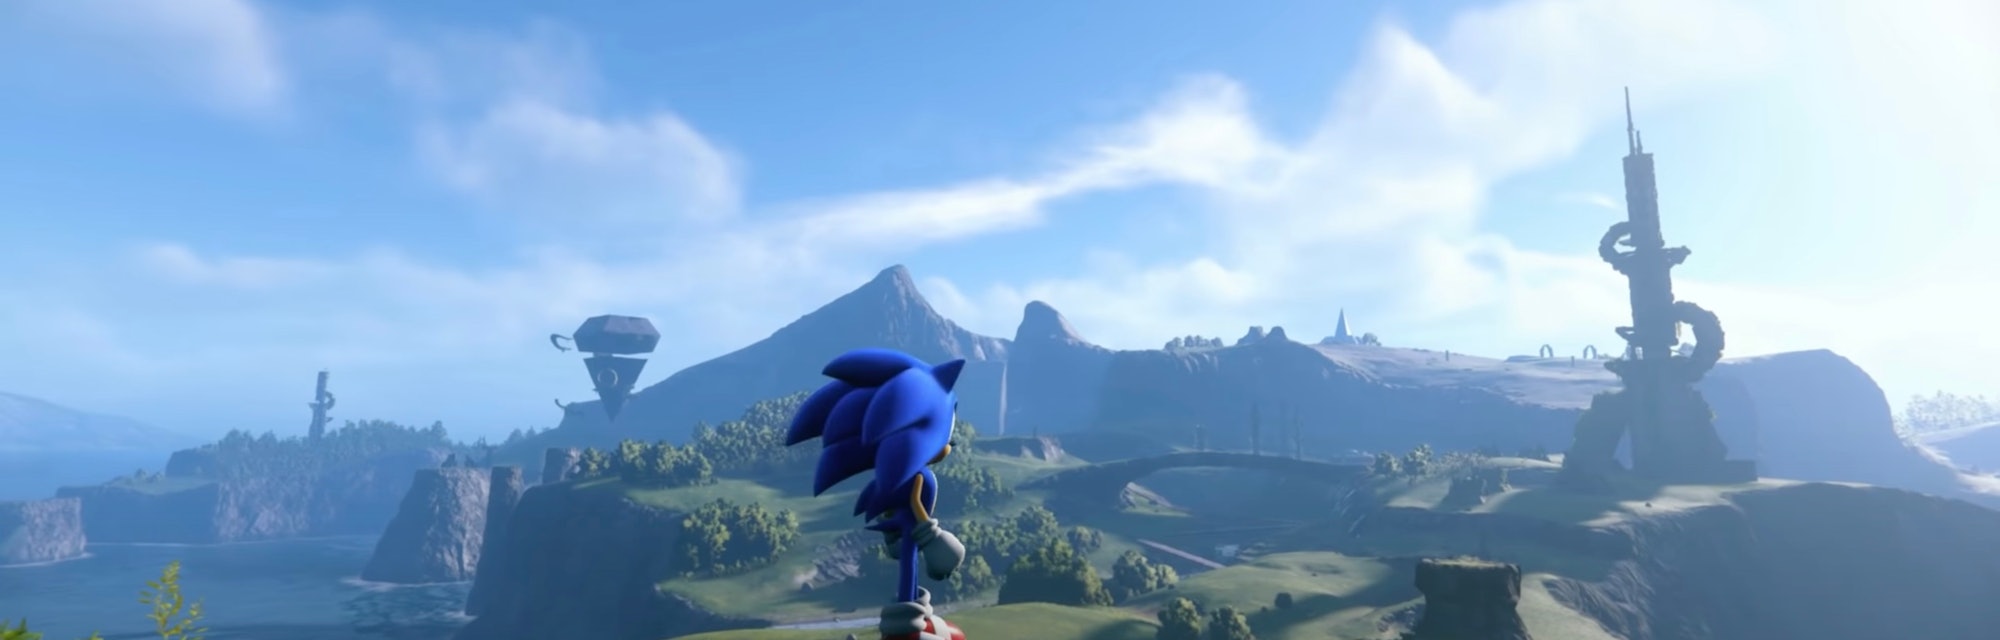 Promotional screenshot for Sonic Frontiers